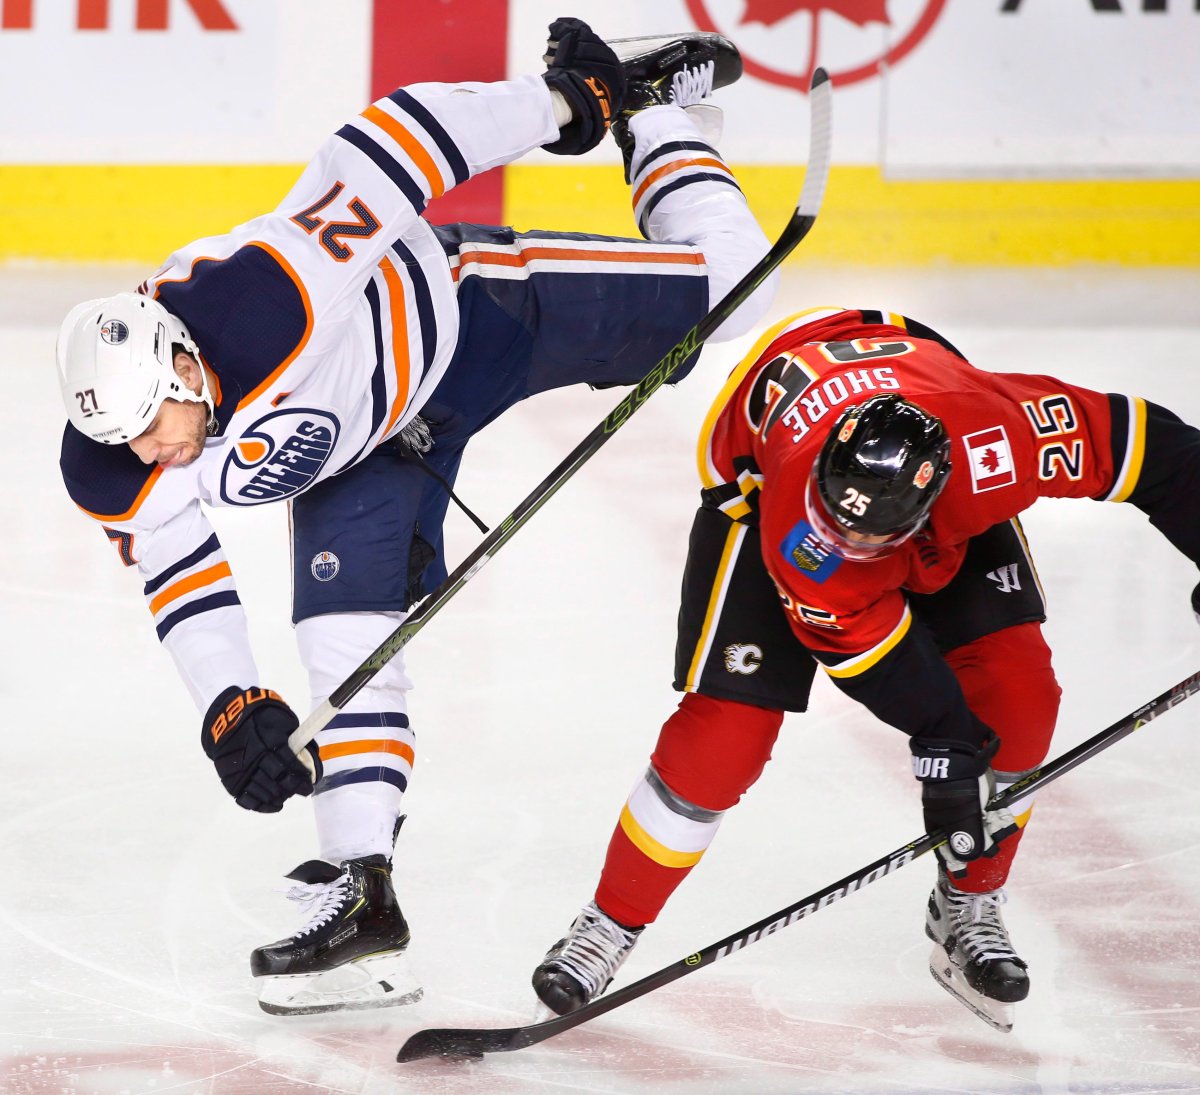 Edmonton Oilers' Milan Lucic (27) is sent flying by Calgary Flames' Nick Shore (25) during second period NHL action in Calgary on Saturday, March 31, 2018. THE CANADIAN PRESS/Larry MacDougal.